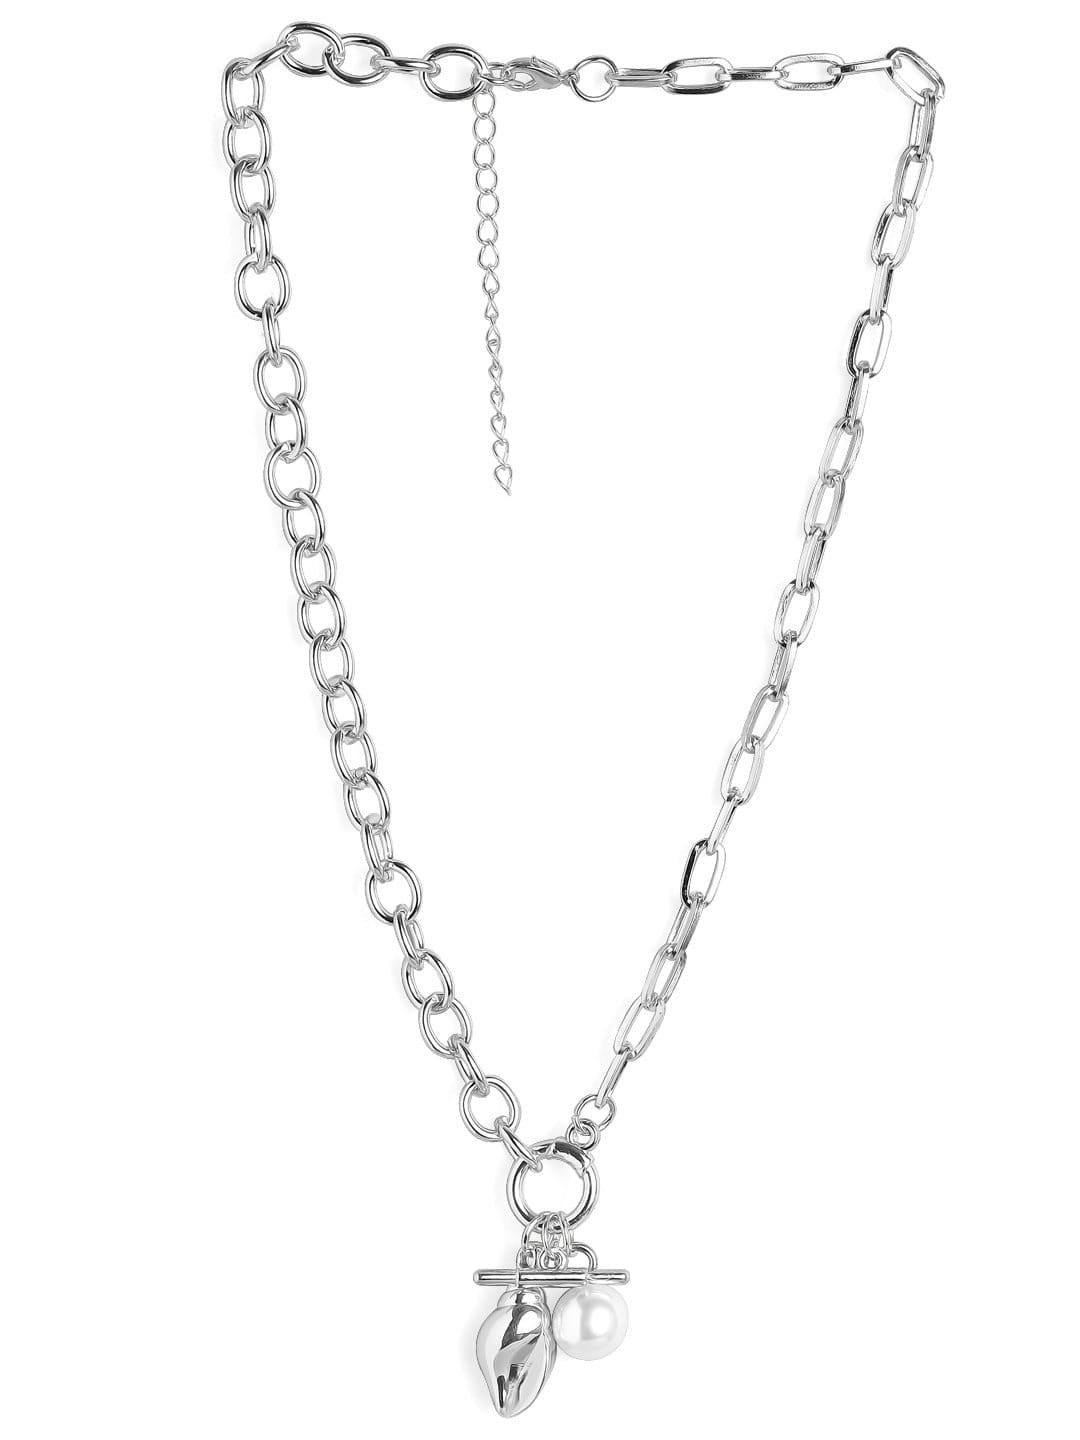 Rubans Silver Plated Handcrafted Shunk Interlinked Chain Necklace Chain & Necklaces